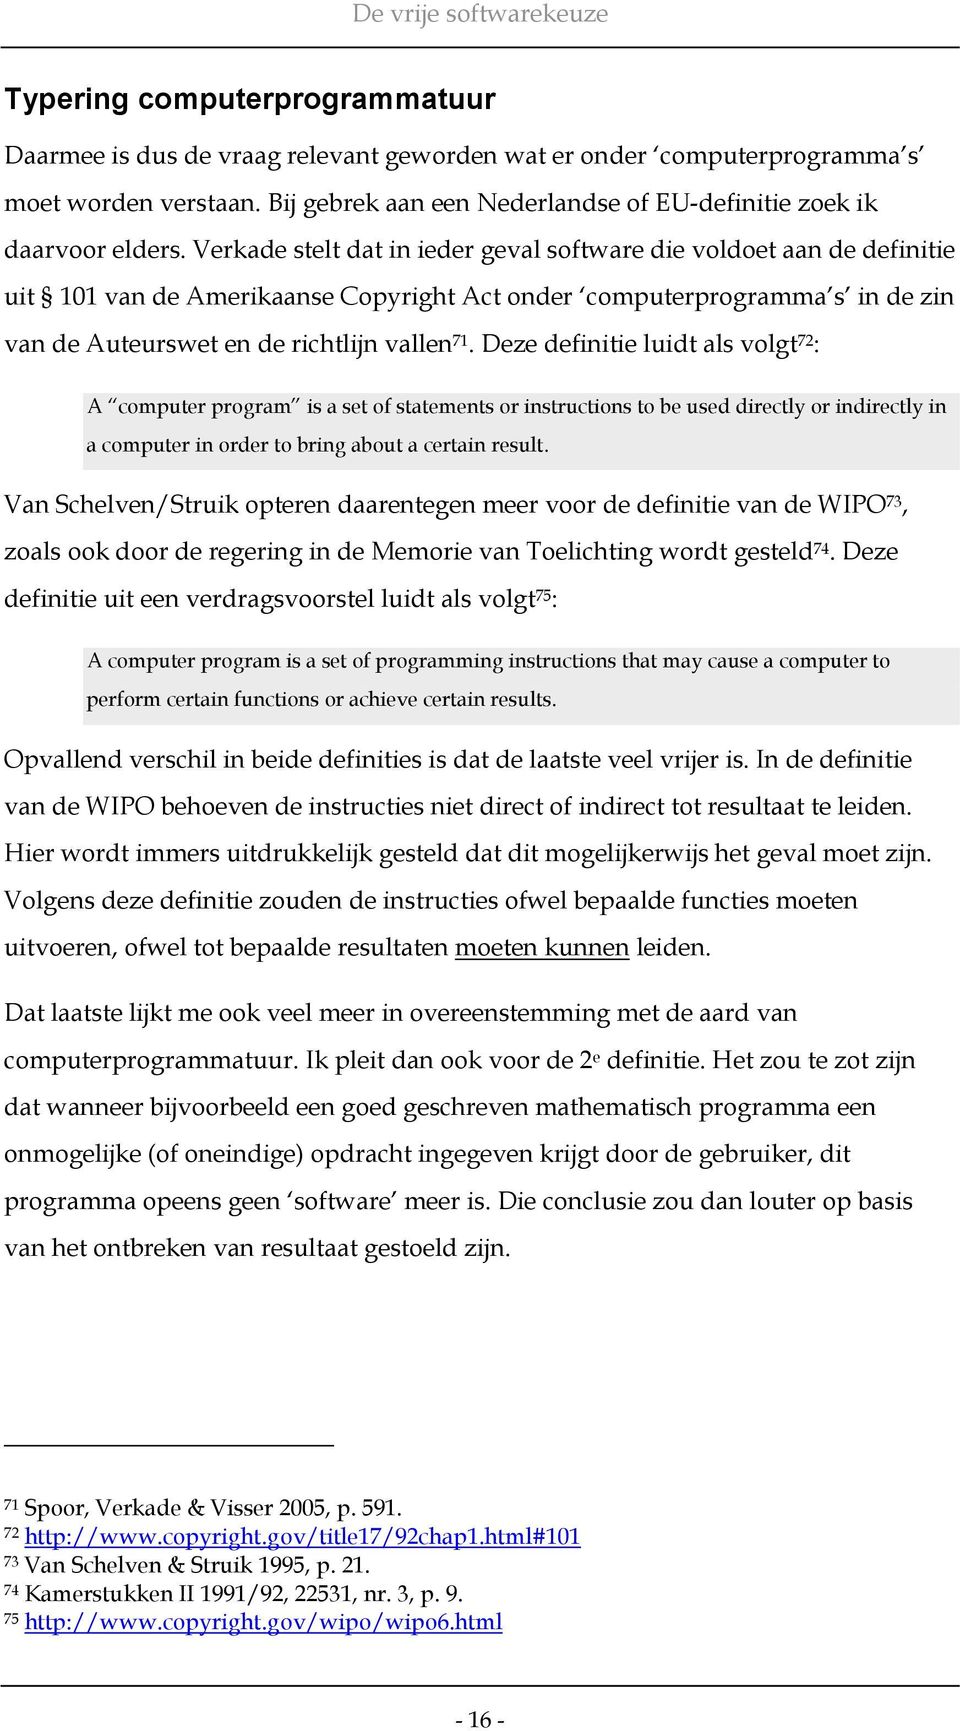 Deze definitie luidt als volgt 72 : A computer program is a set of statements or instructions to be used directly or indirectly in a computer in order to bring about a certain result.